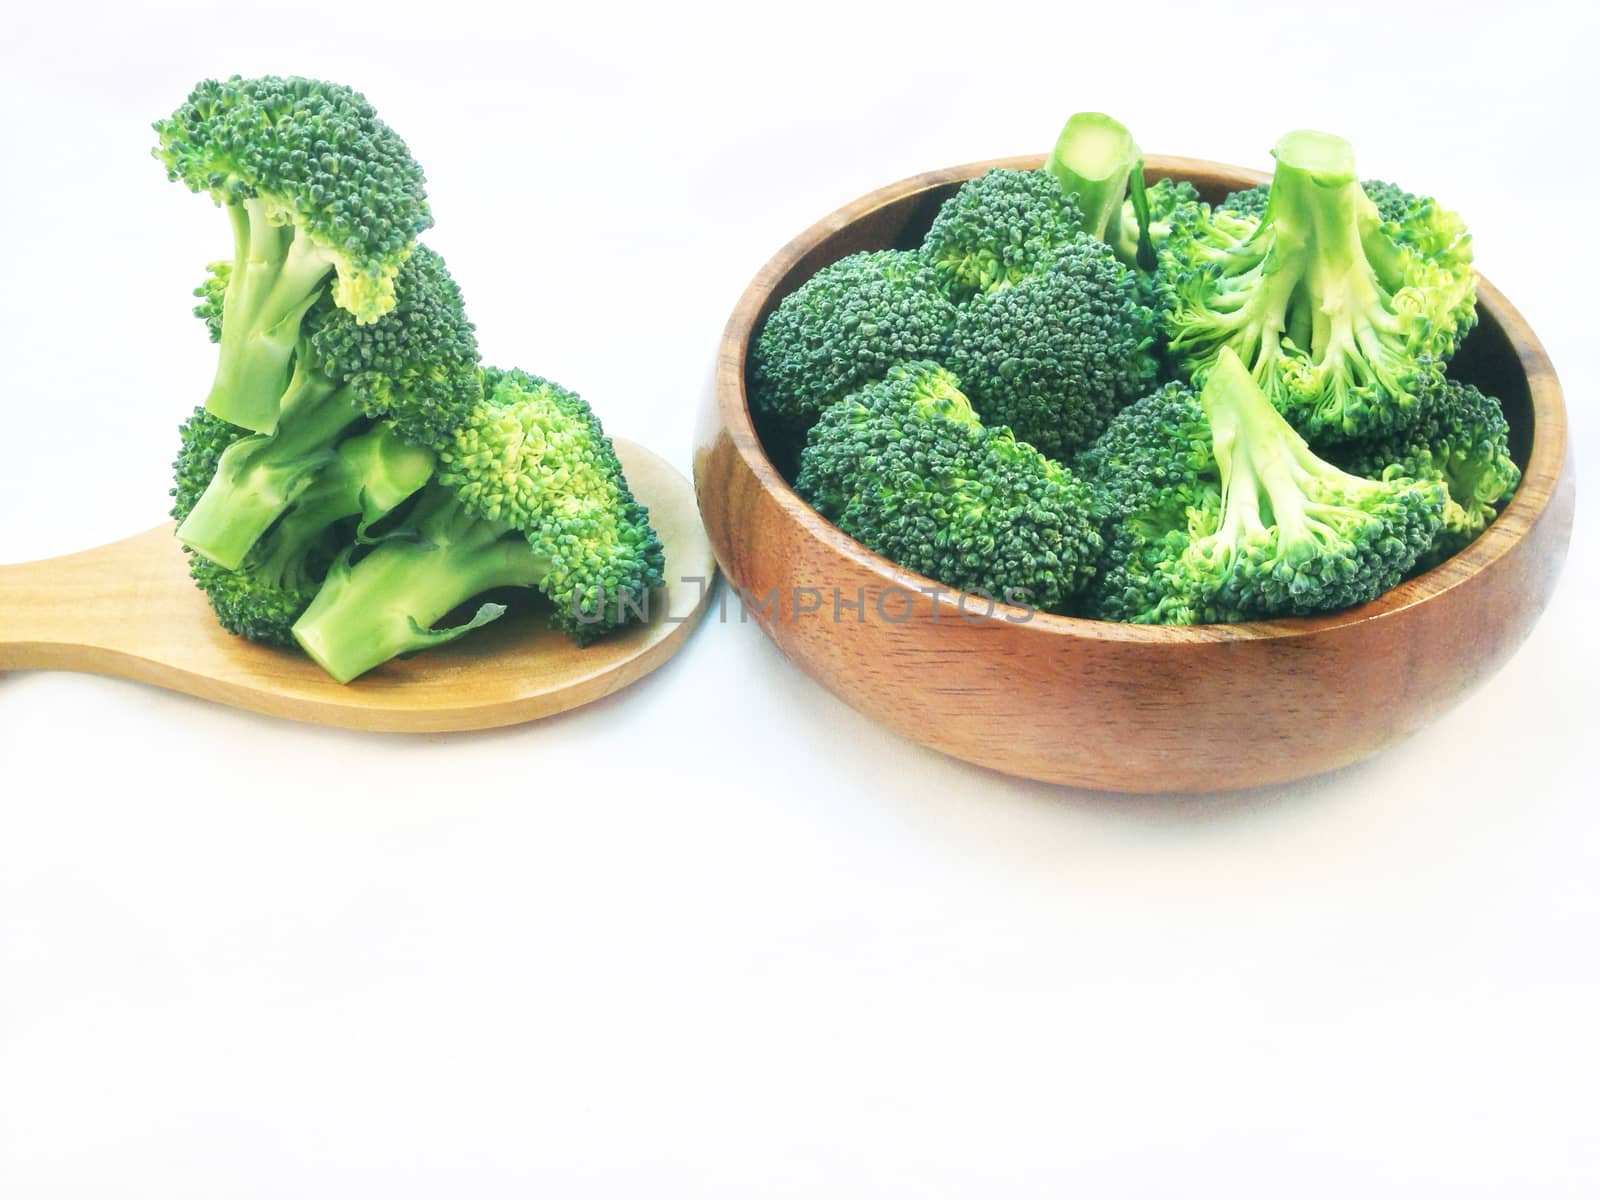 Broccoli in wooden bowl and wooden spoon on white background by Bowonpat